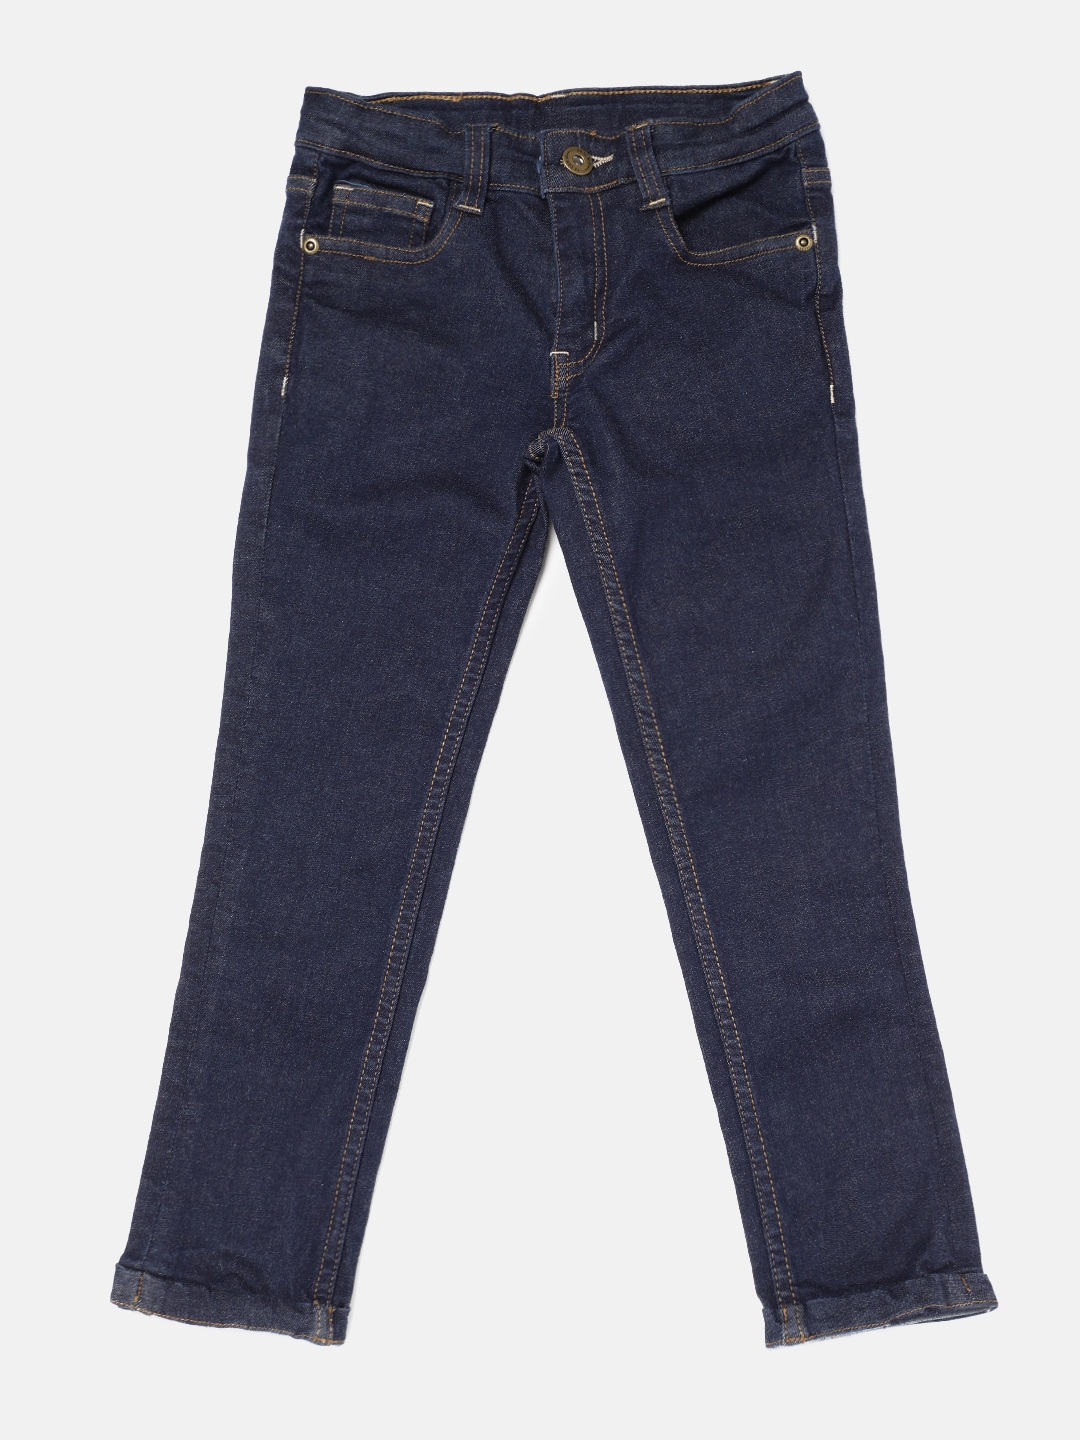 Buy YK Boys Blue Mid Rise Clean Look Jeans - Jeans for Boys 2509430 ...